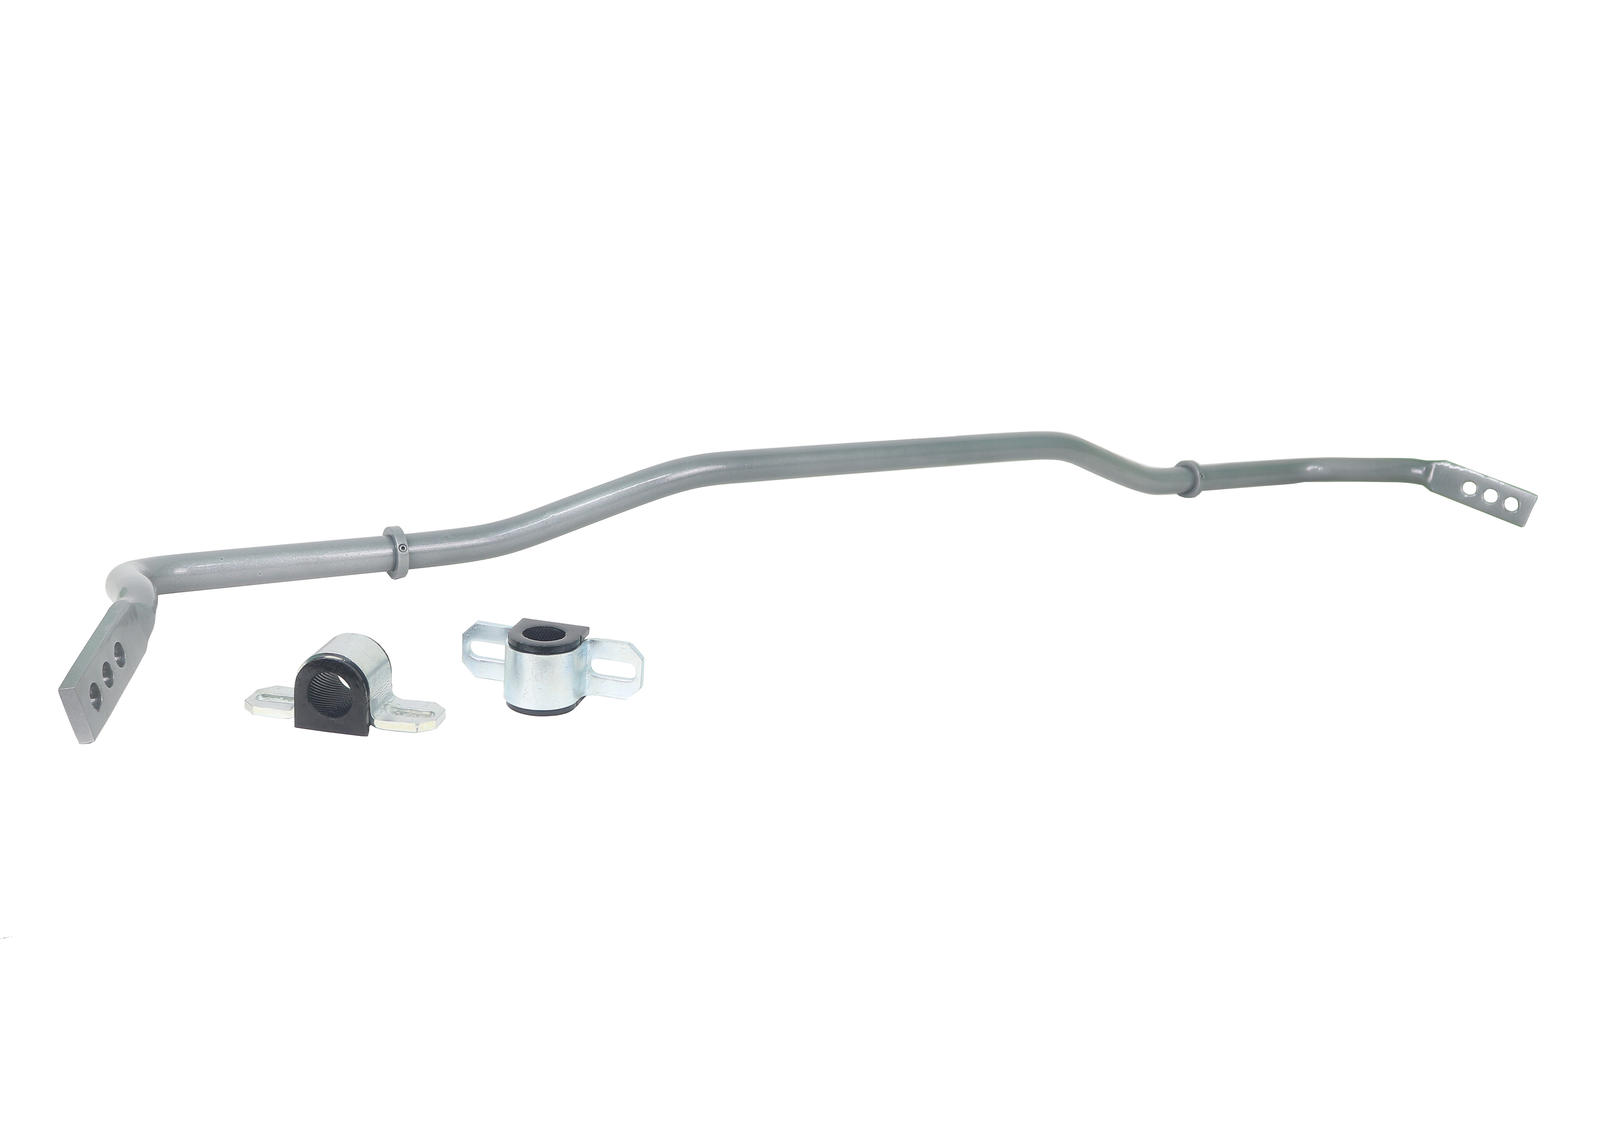 Rear Sway Bar - 24m 3 Point Adjustable to Suit Ford Mustang S550 FM, FN